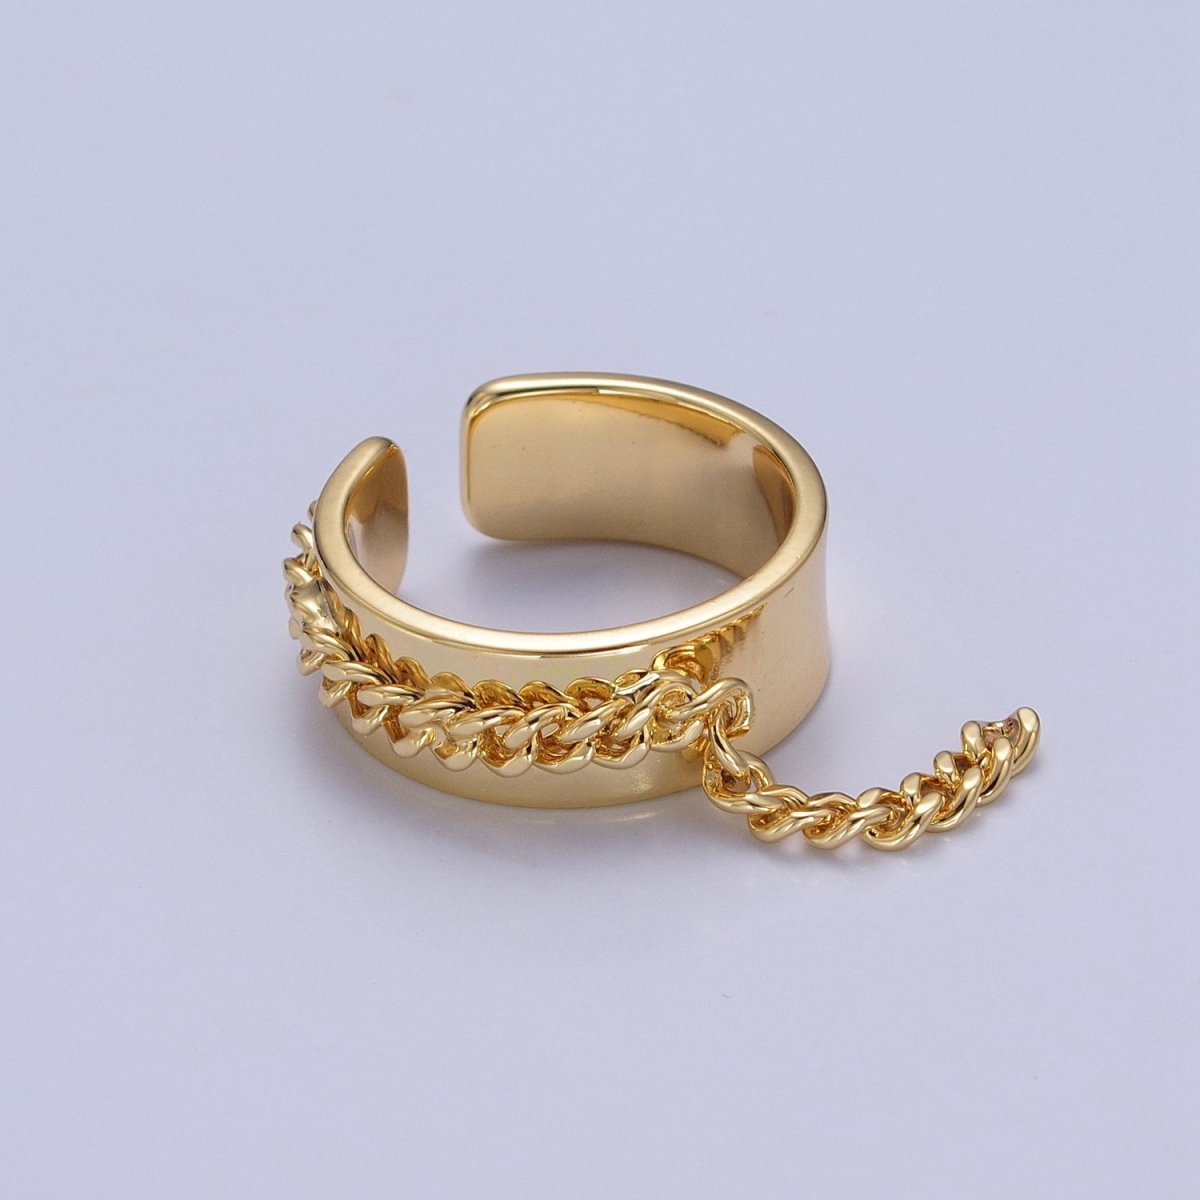 Adjustable Chain Ring - Gold Open Band Ring - Midi Stacking Ring - Punk Chain Ring O-2191 O-2192 - DLUXCA